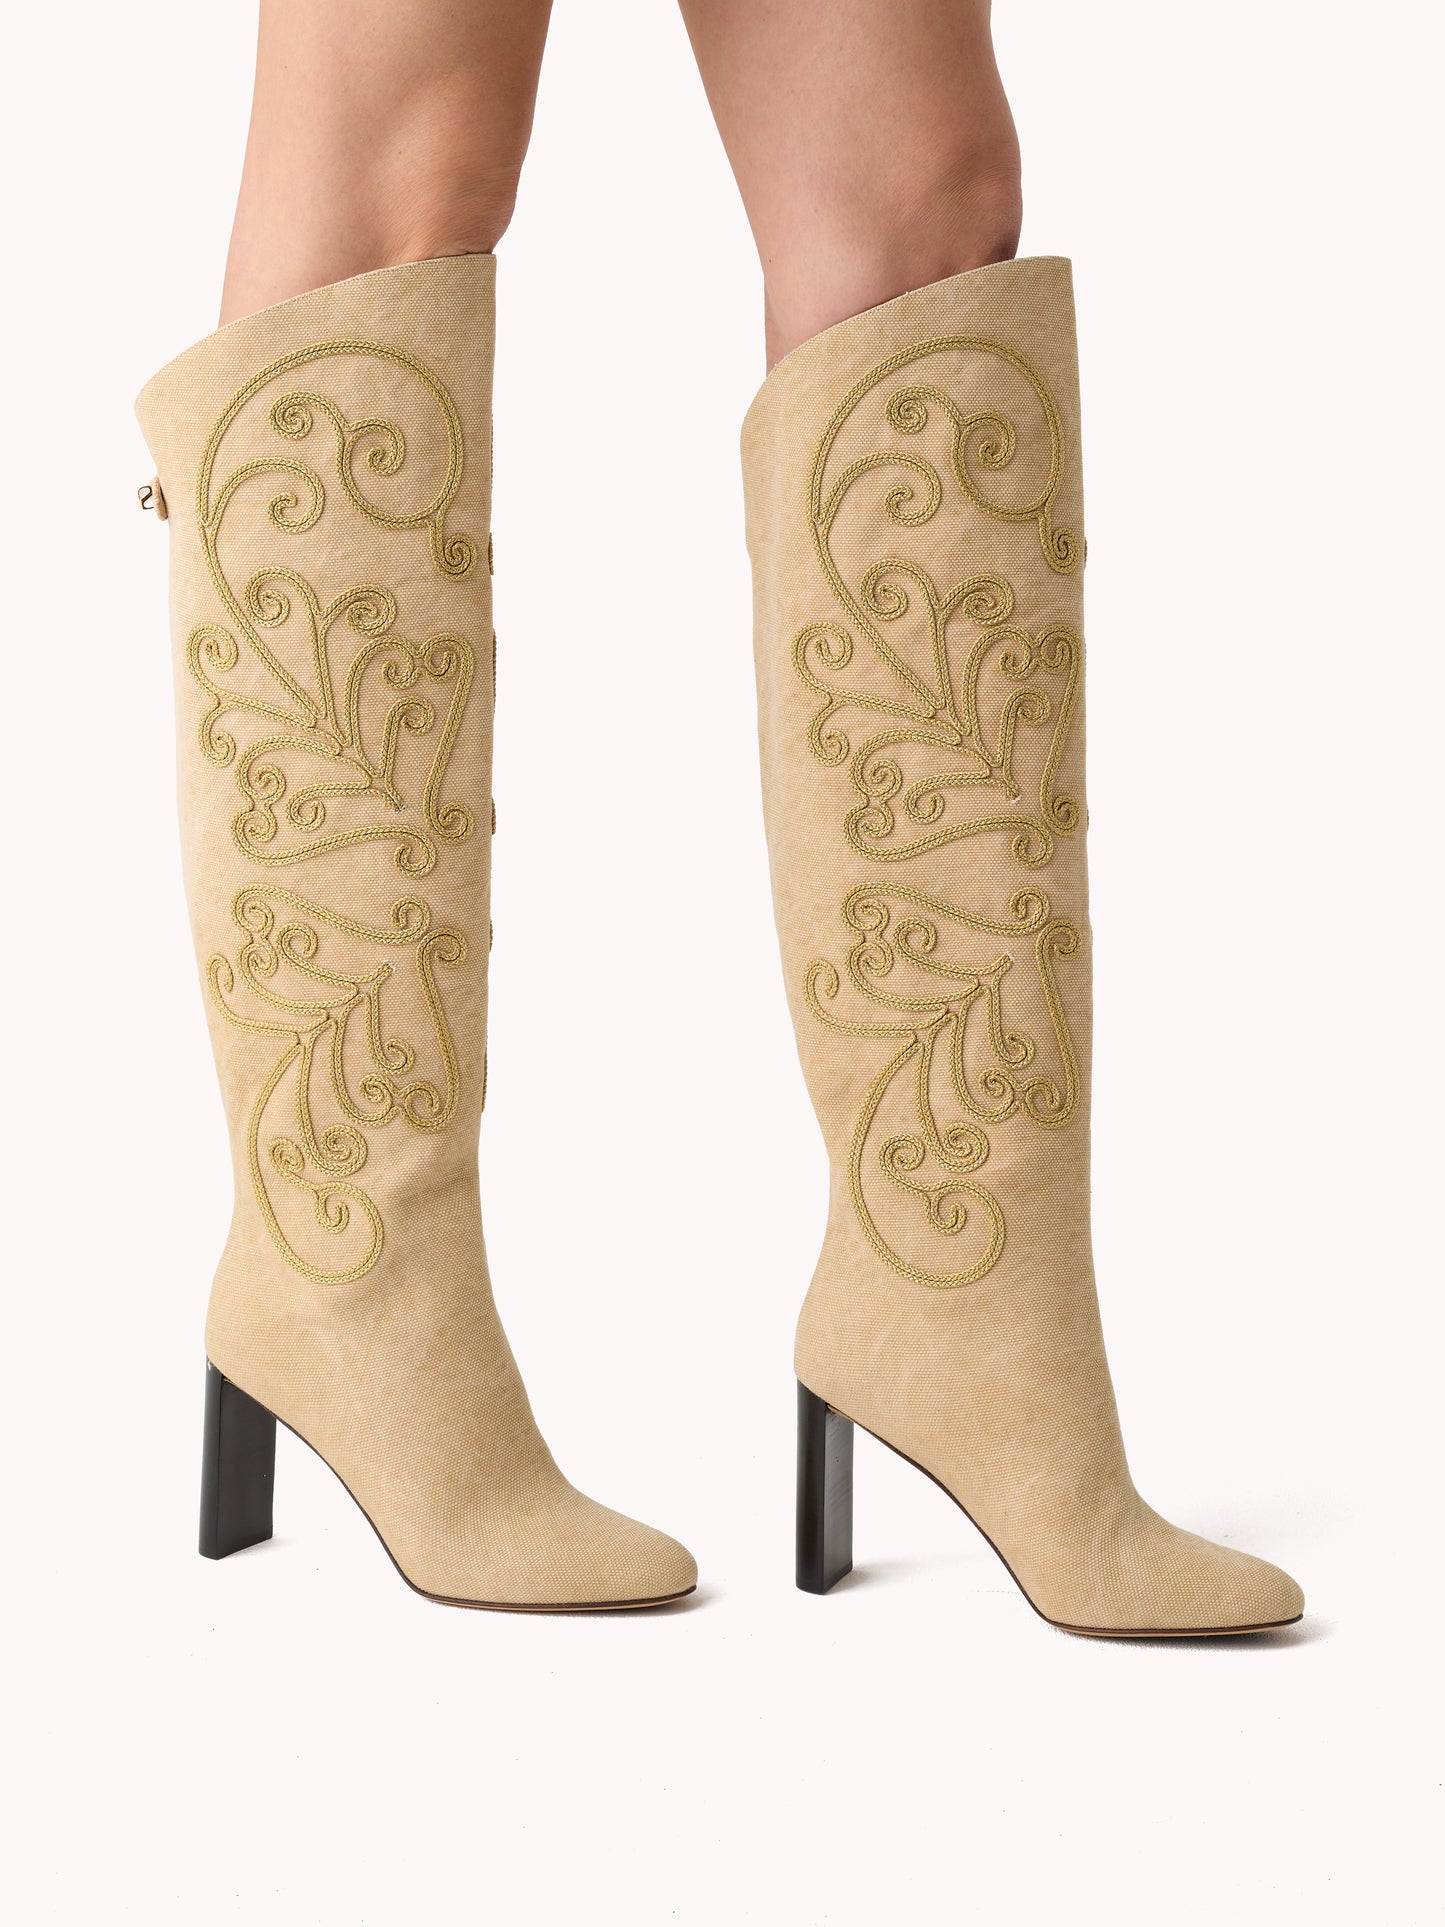 luxury sand canvas knee high boots comfortable high heels made in Italy skorpios